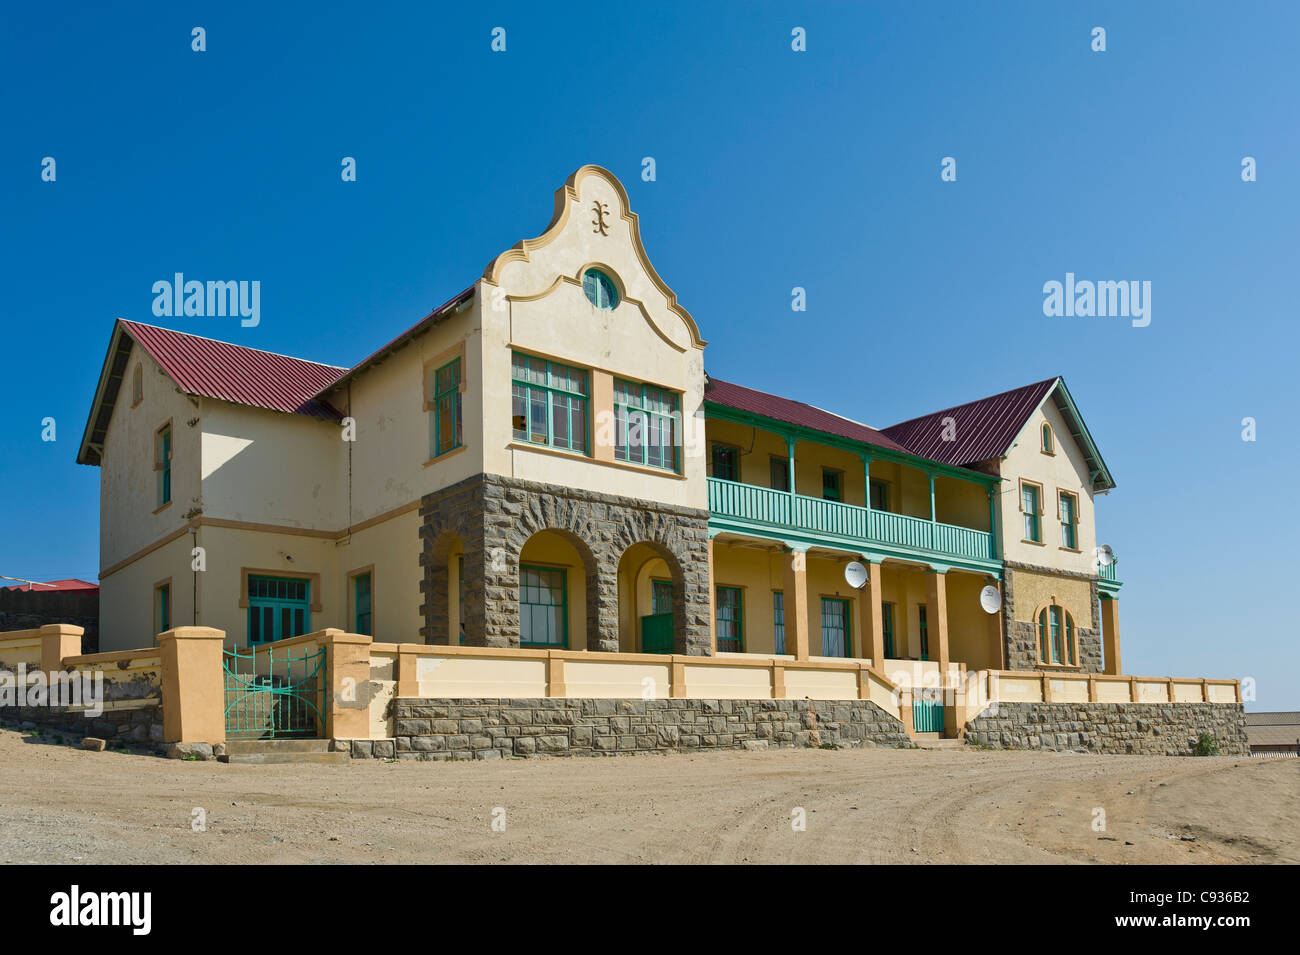 Historical German building in Luederitz Namibia Stock Photo